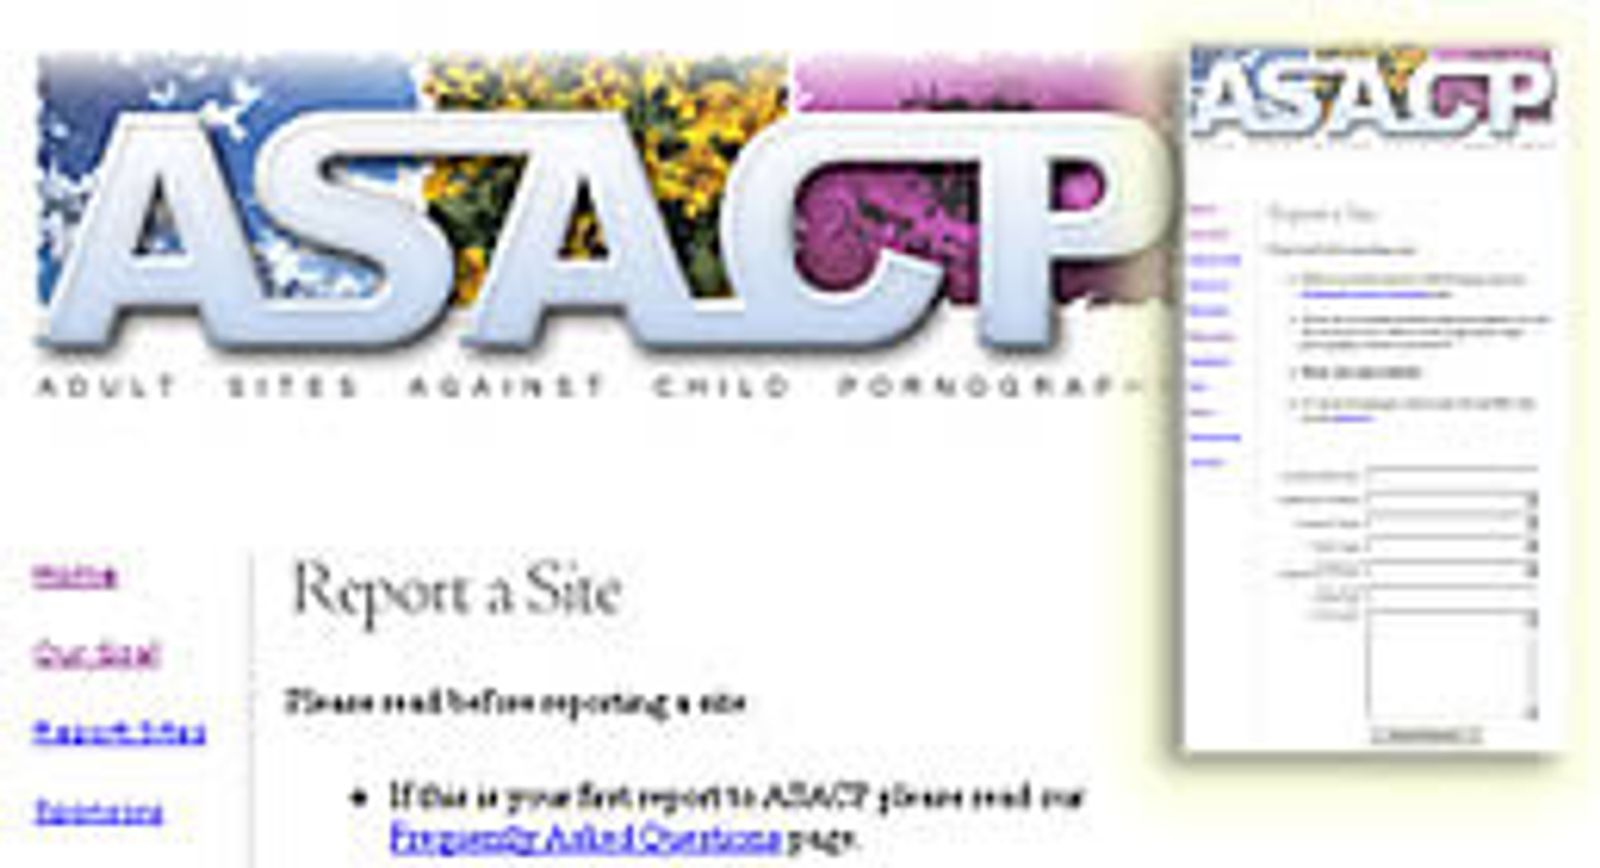 How To Surf Safe And Avoid Child Porn: ASACP